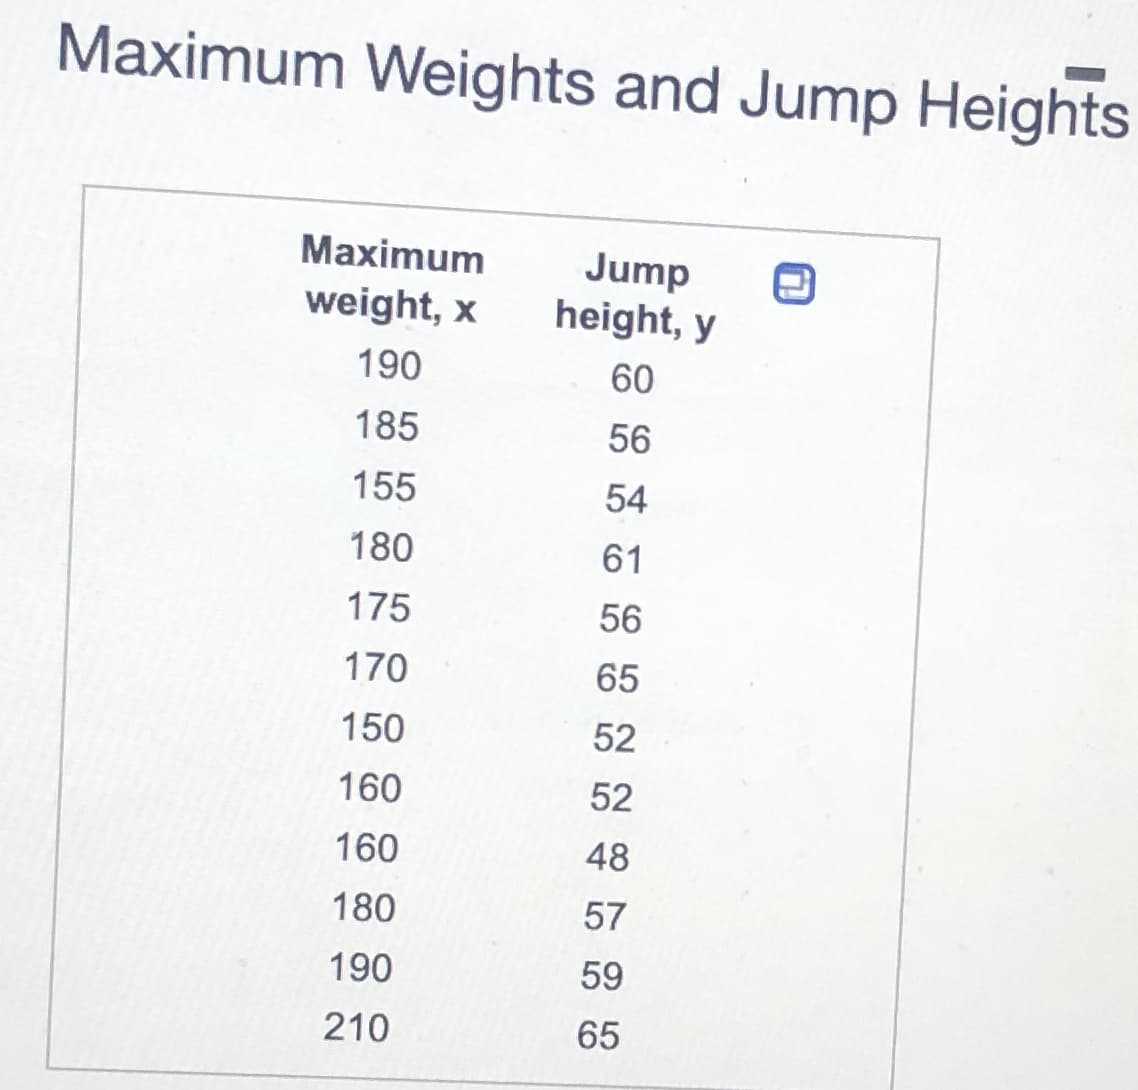 Maximum Weights and Jump Heights
Maximum
Jump
height, y
weight, x
190
60
185
56
155
54
180
61
175
56
170
65
150
52
160
52
160
48
180
57
190
59
210
65
